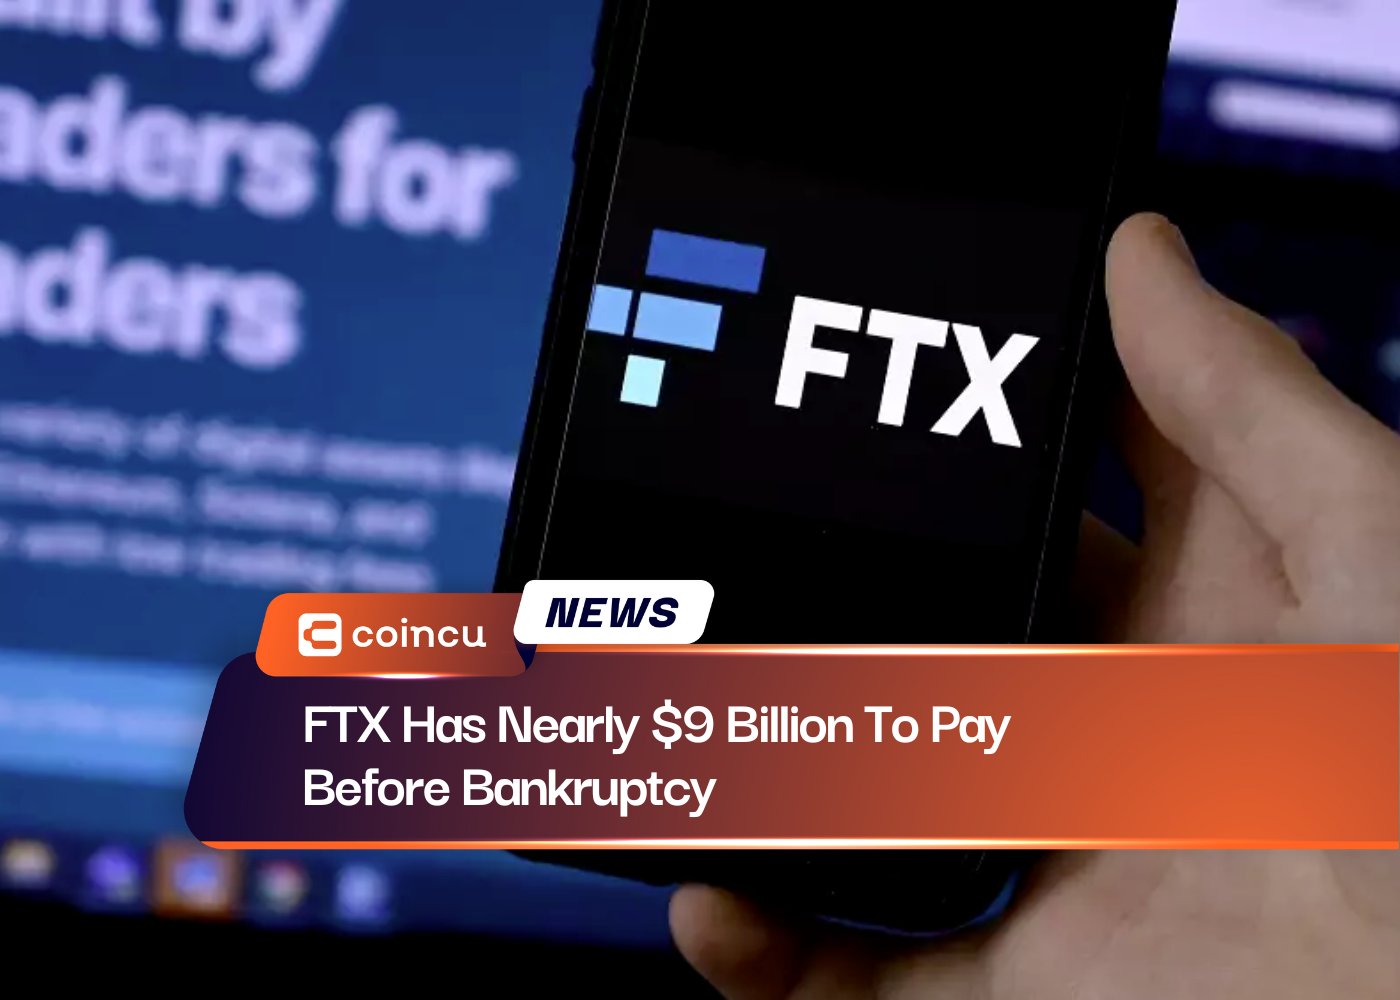 FTX Has Nearly $9 Billion To Pay Before Bankruptcy